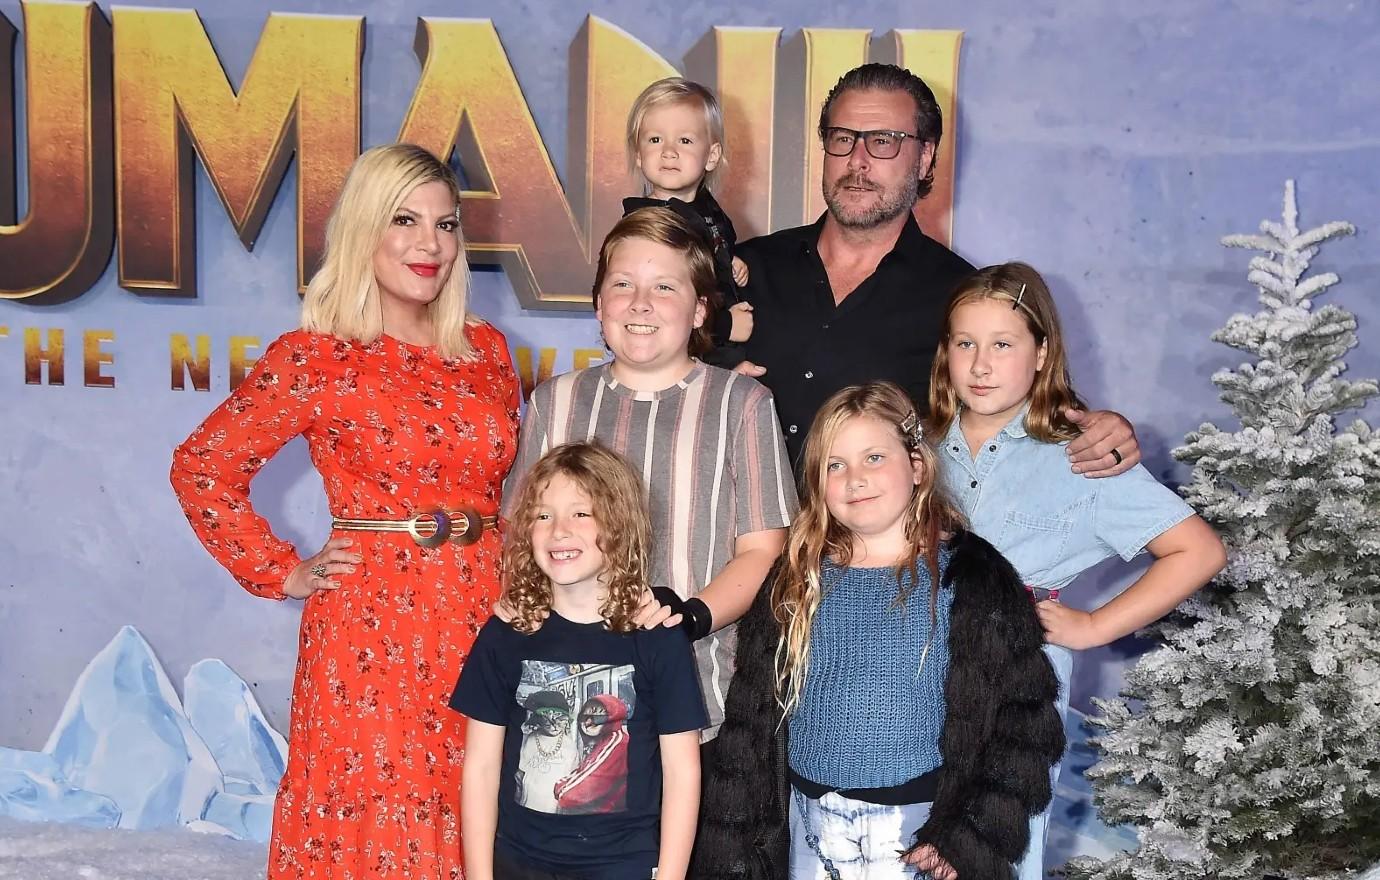 Dean McDermott Reaching Boiling Point with Tori Spelling, Hates Being Made to Look Like the Bad Guy Report